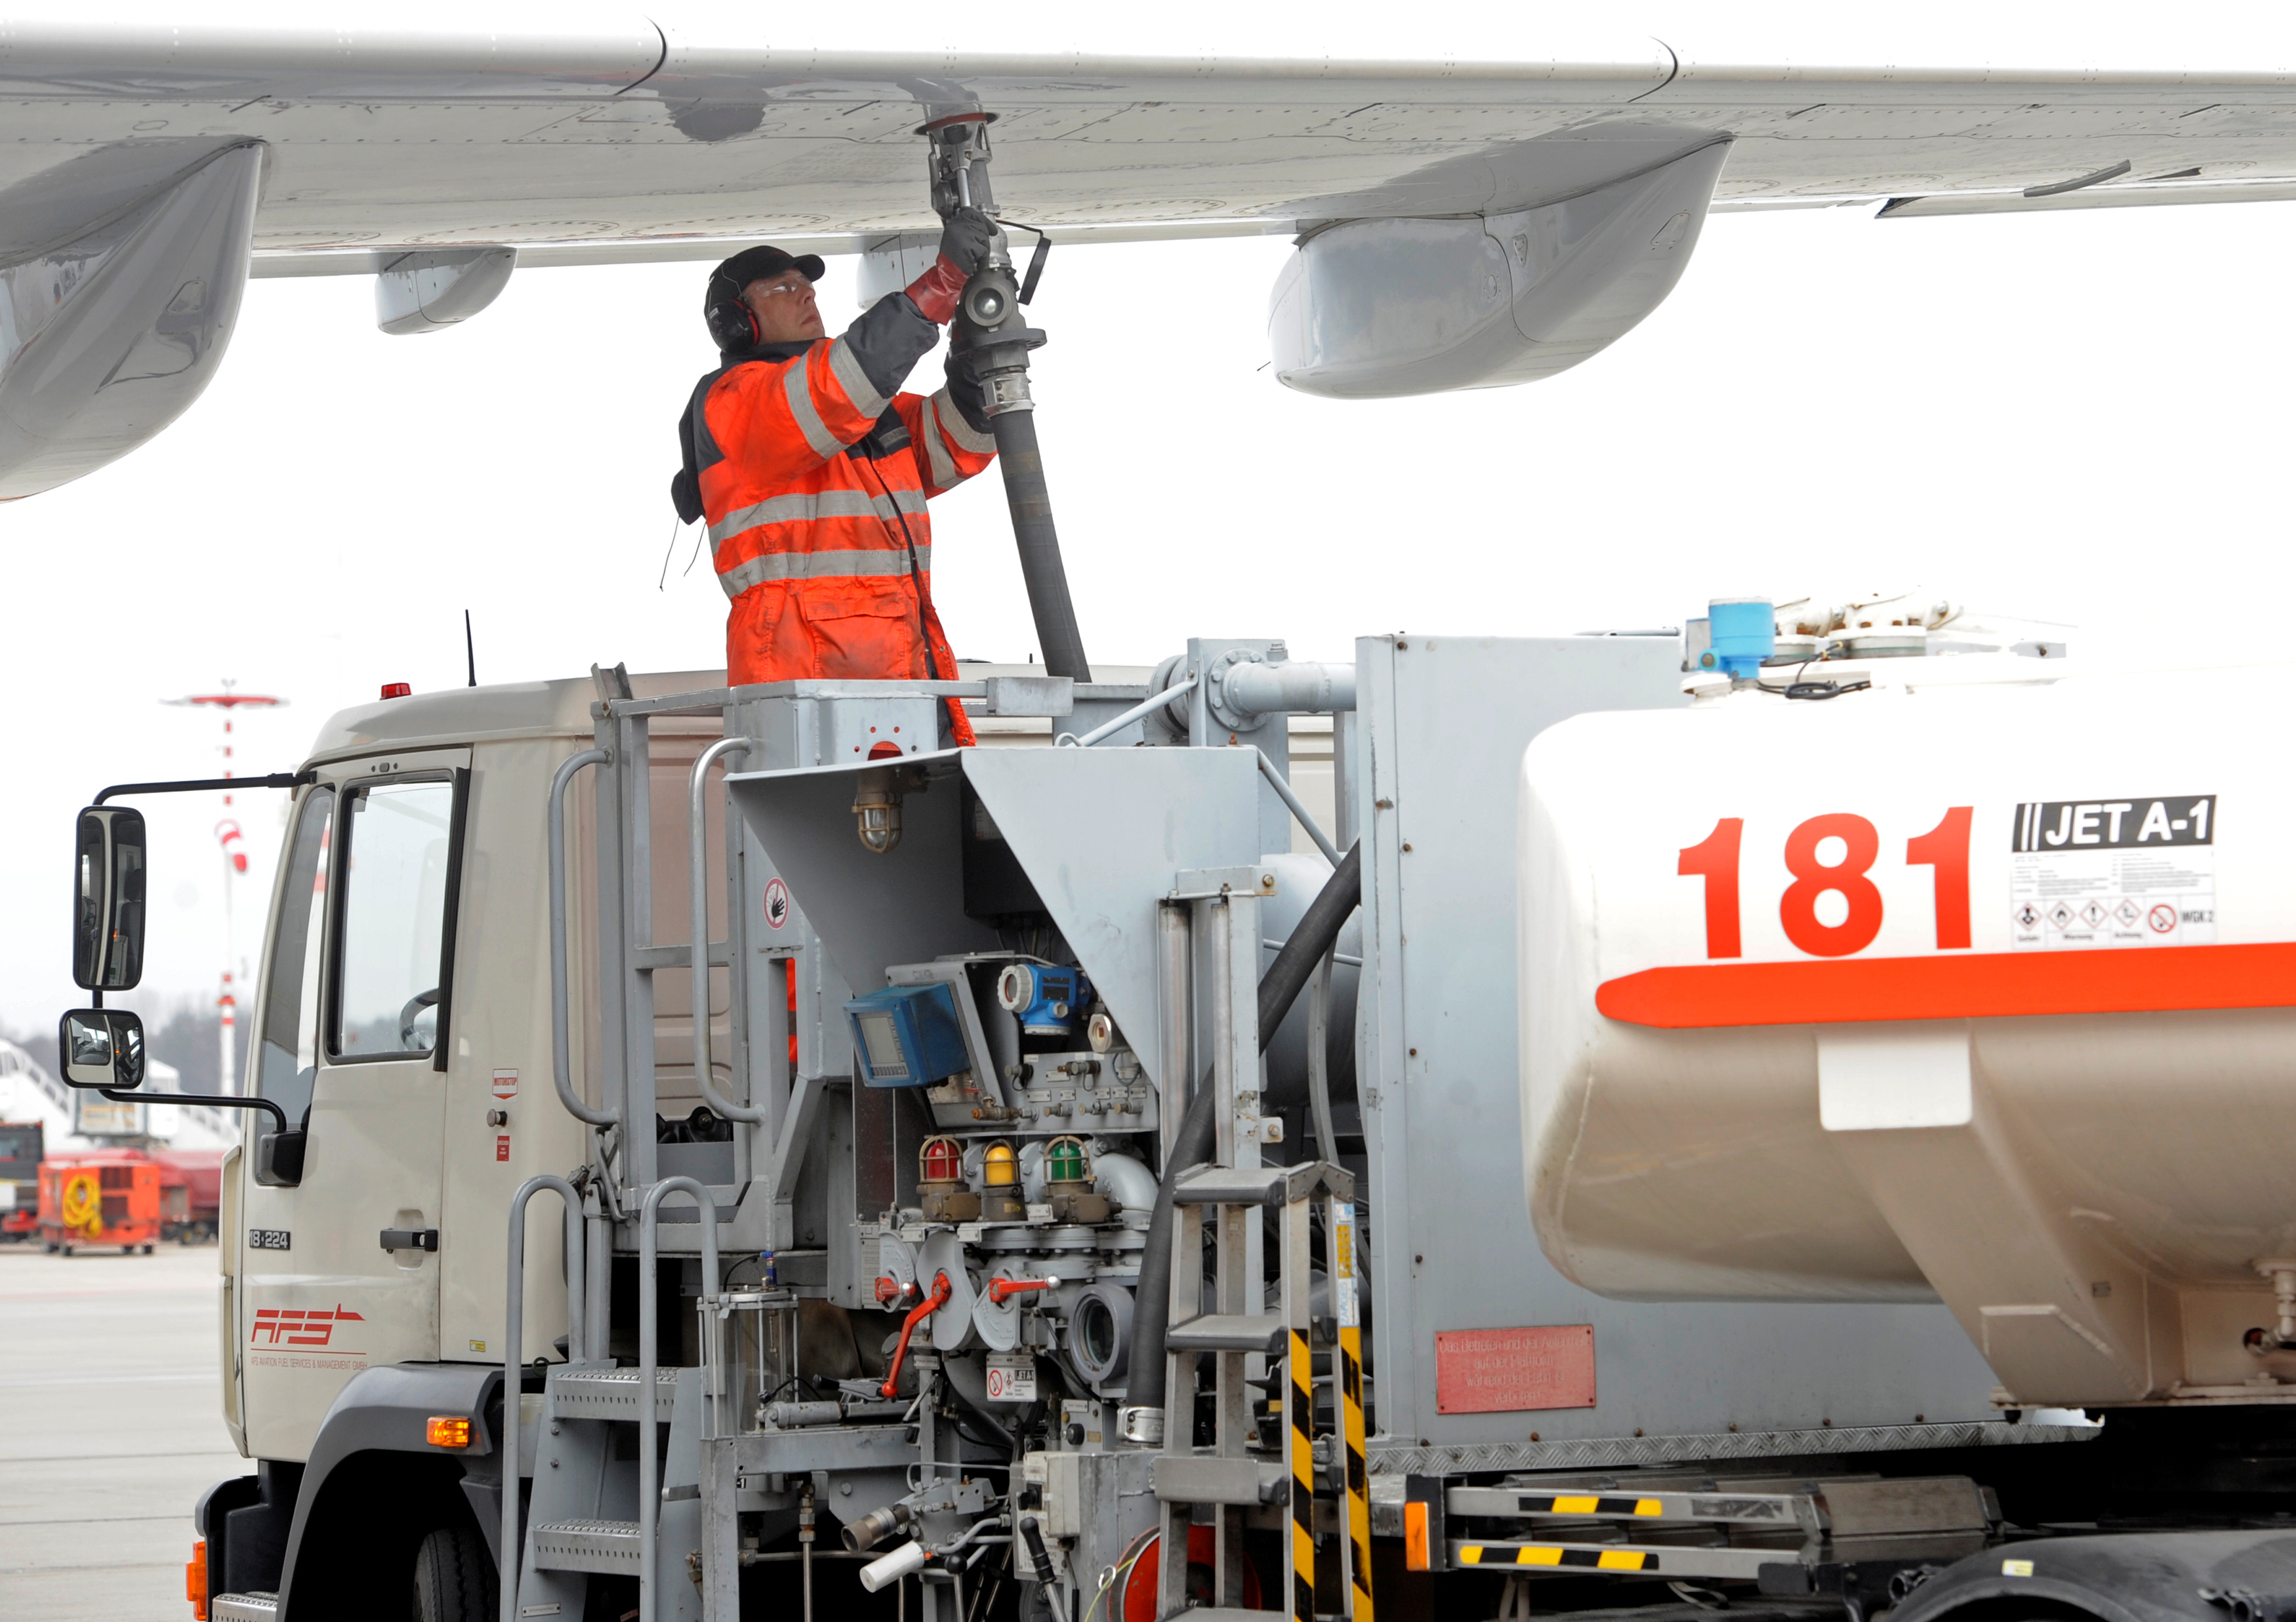 A worker fills an Airbus jet with aviation fuel at Fuhlsbuettel airport in Hamburg, March 14, 2012.  REUTERS/Fabian Bimmer/File Photo